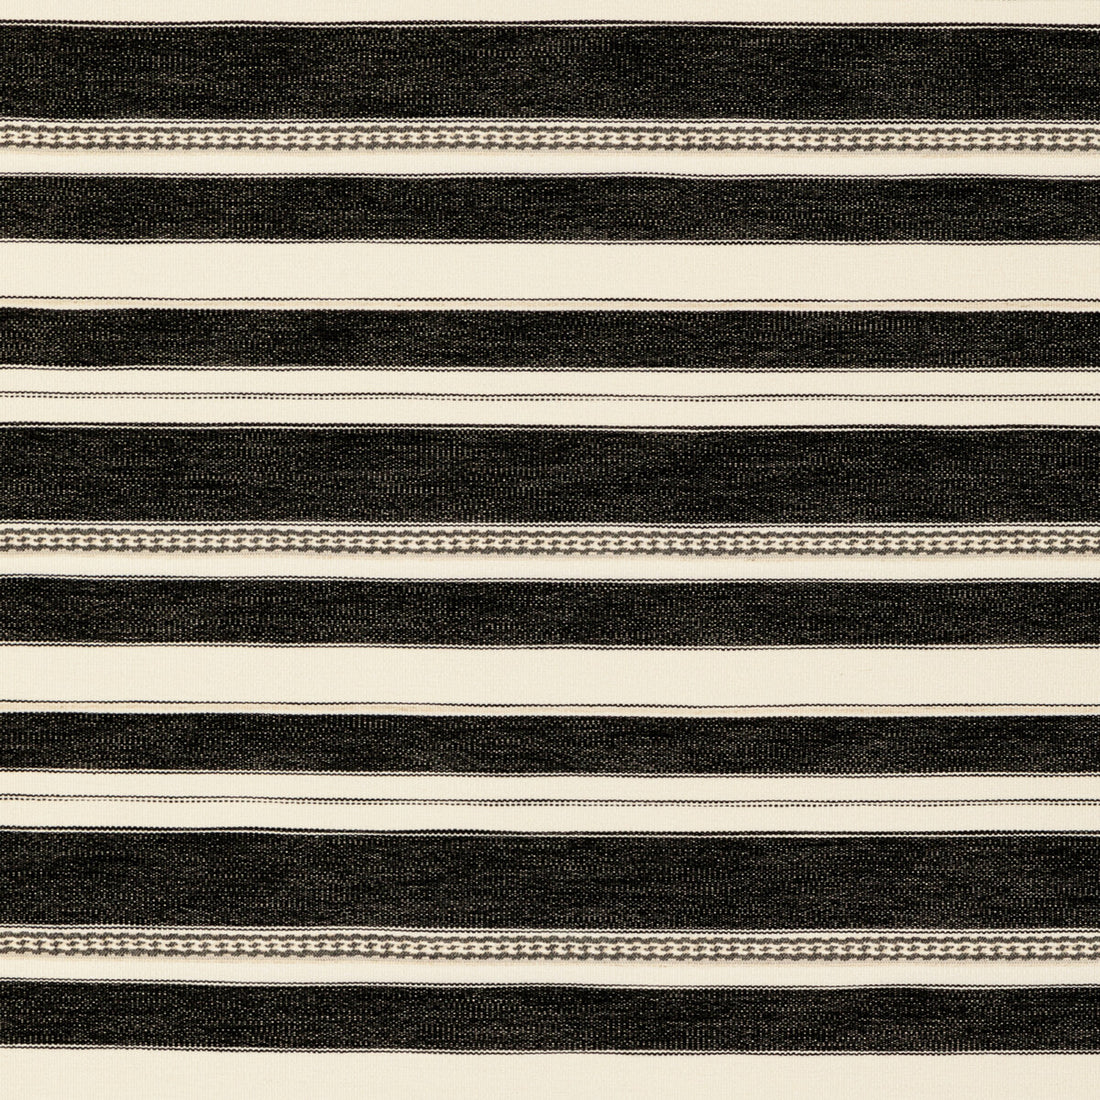 Entoto Stripe fabric in ivory/black color - pattern 2017143.811.0 - by Lee Jofa in the Breckenridge collection